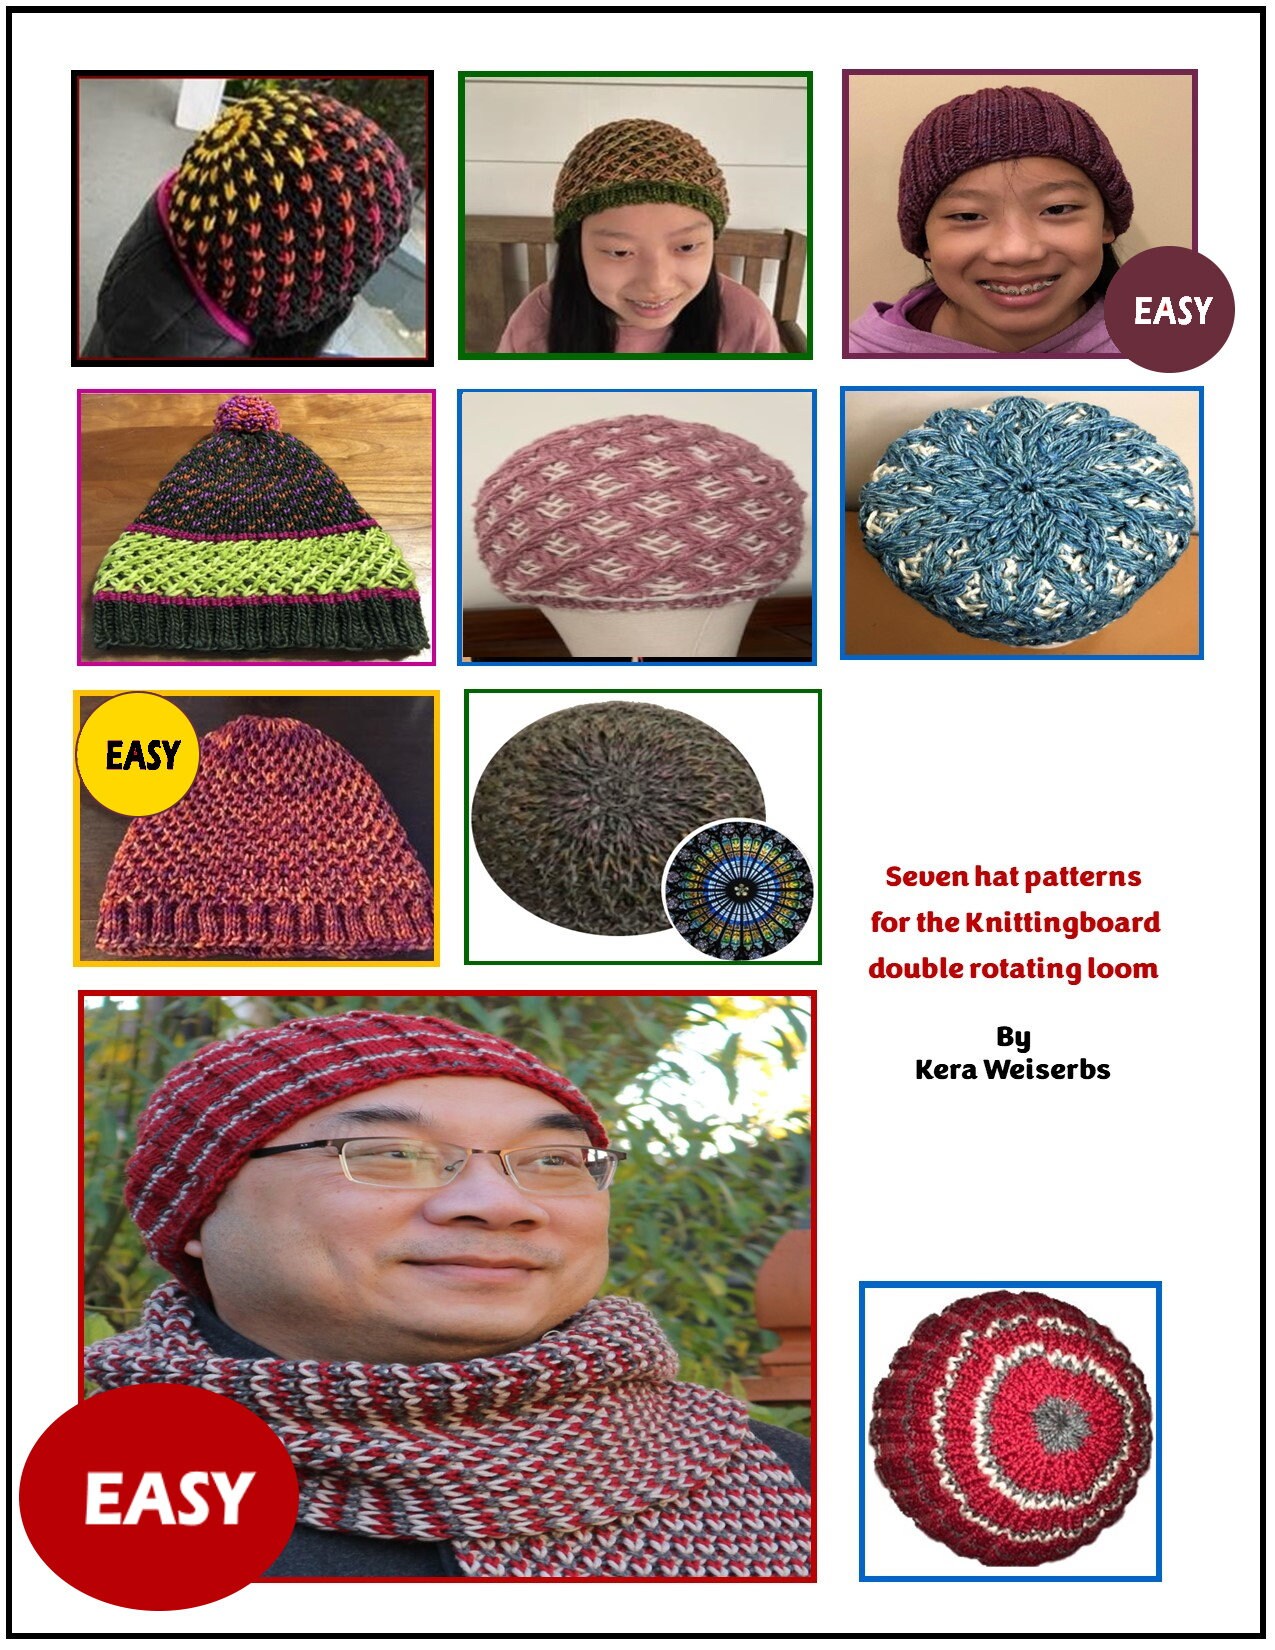 Patterns for Double Rake Loom Knitting: book by Kera Weiserbs